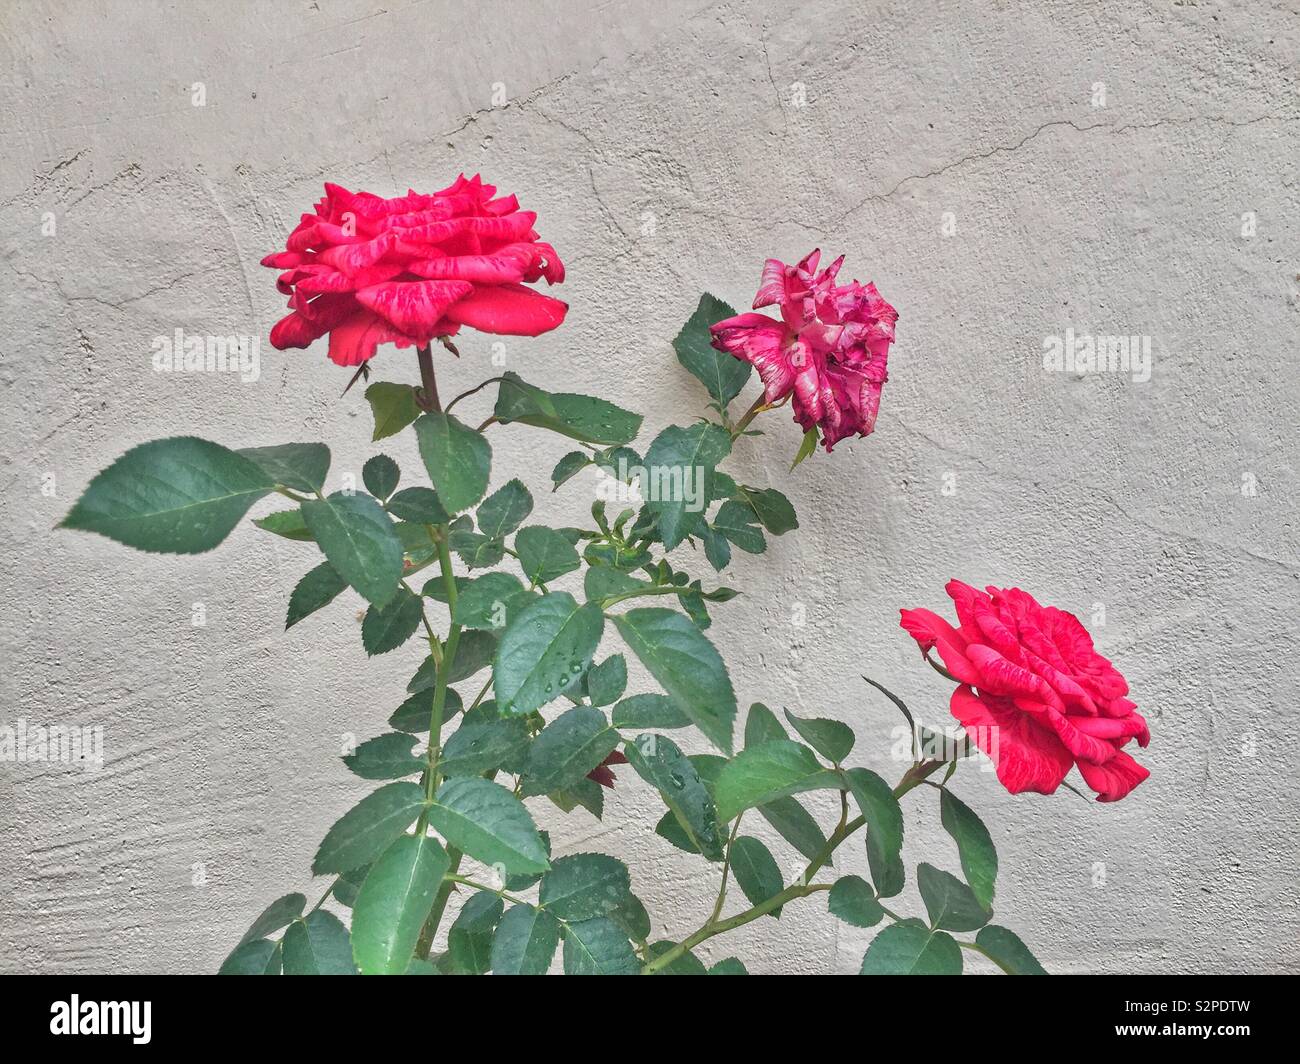 Red roses blooming Stock Photo